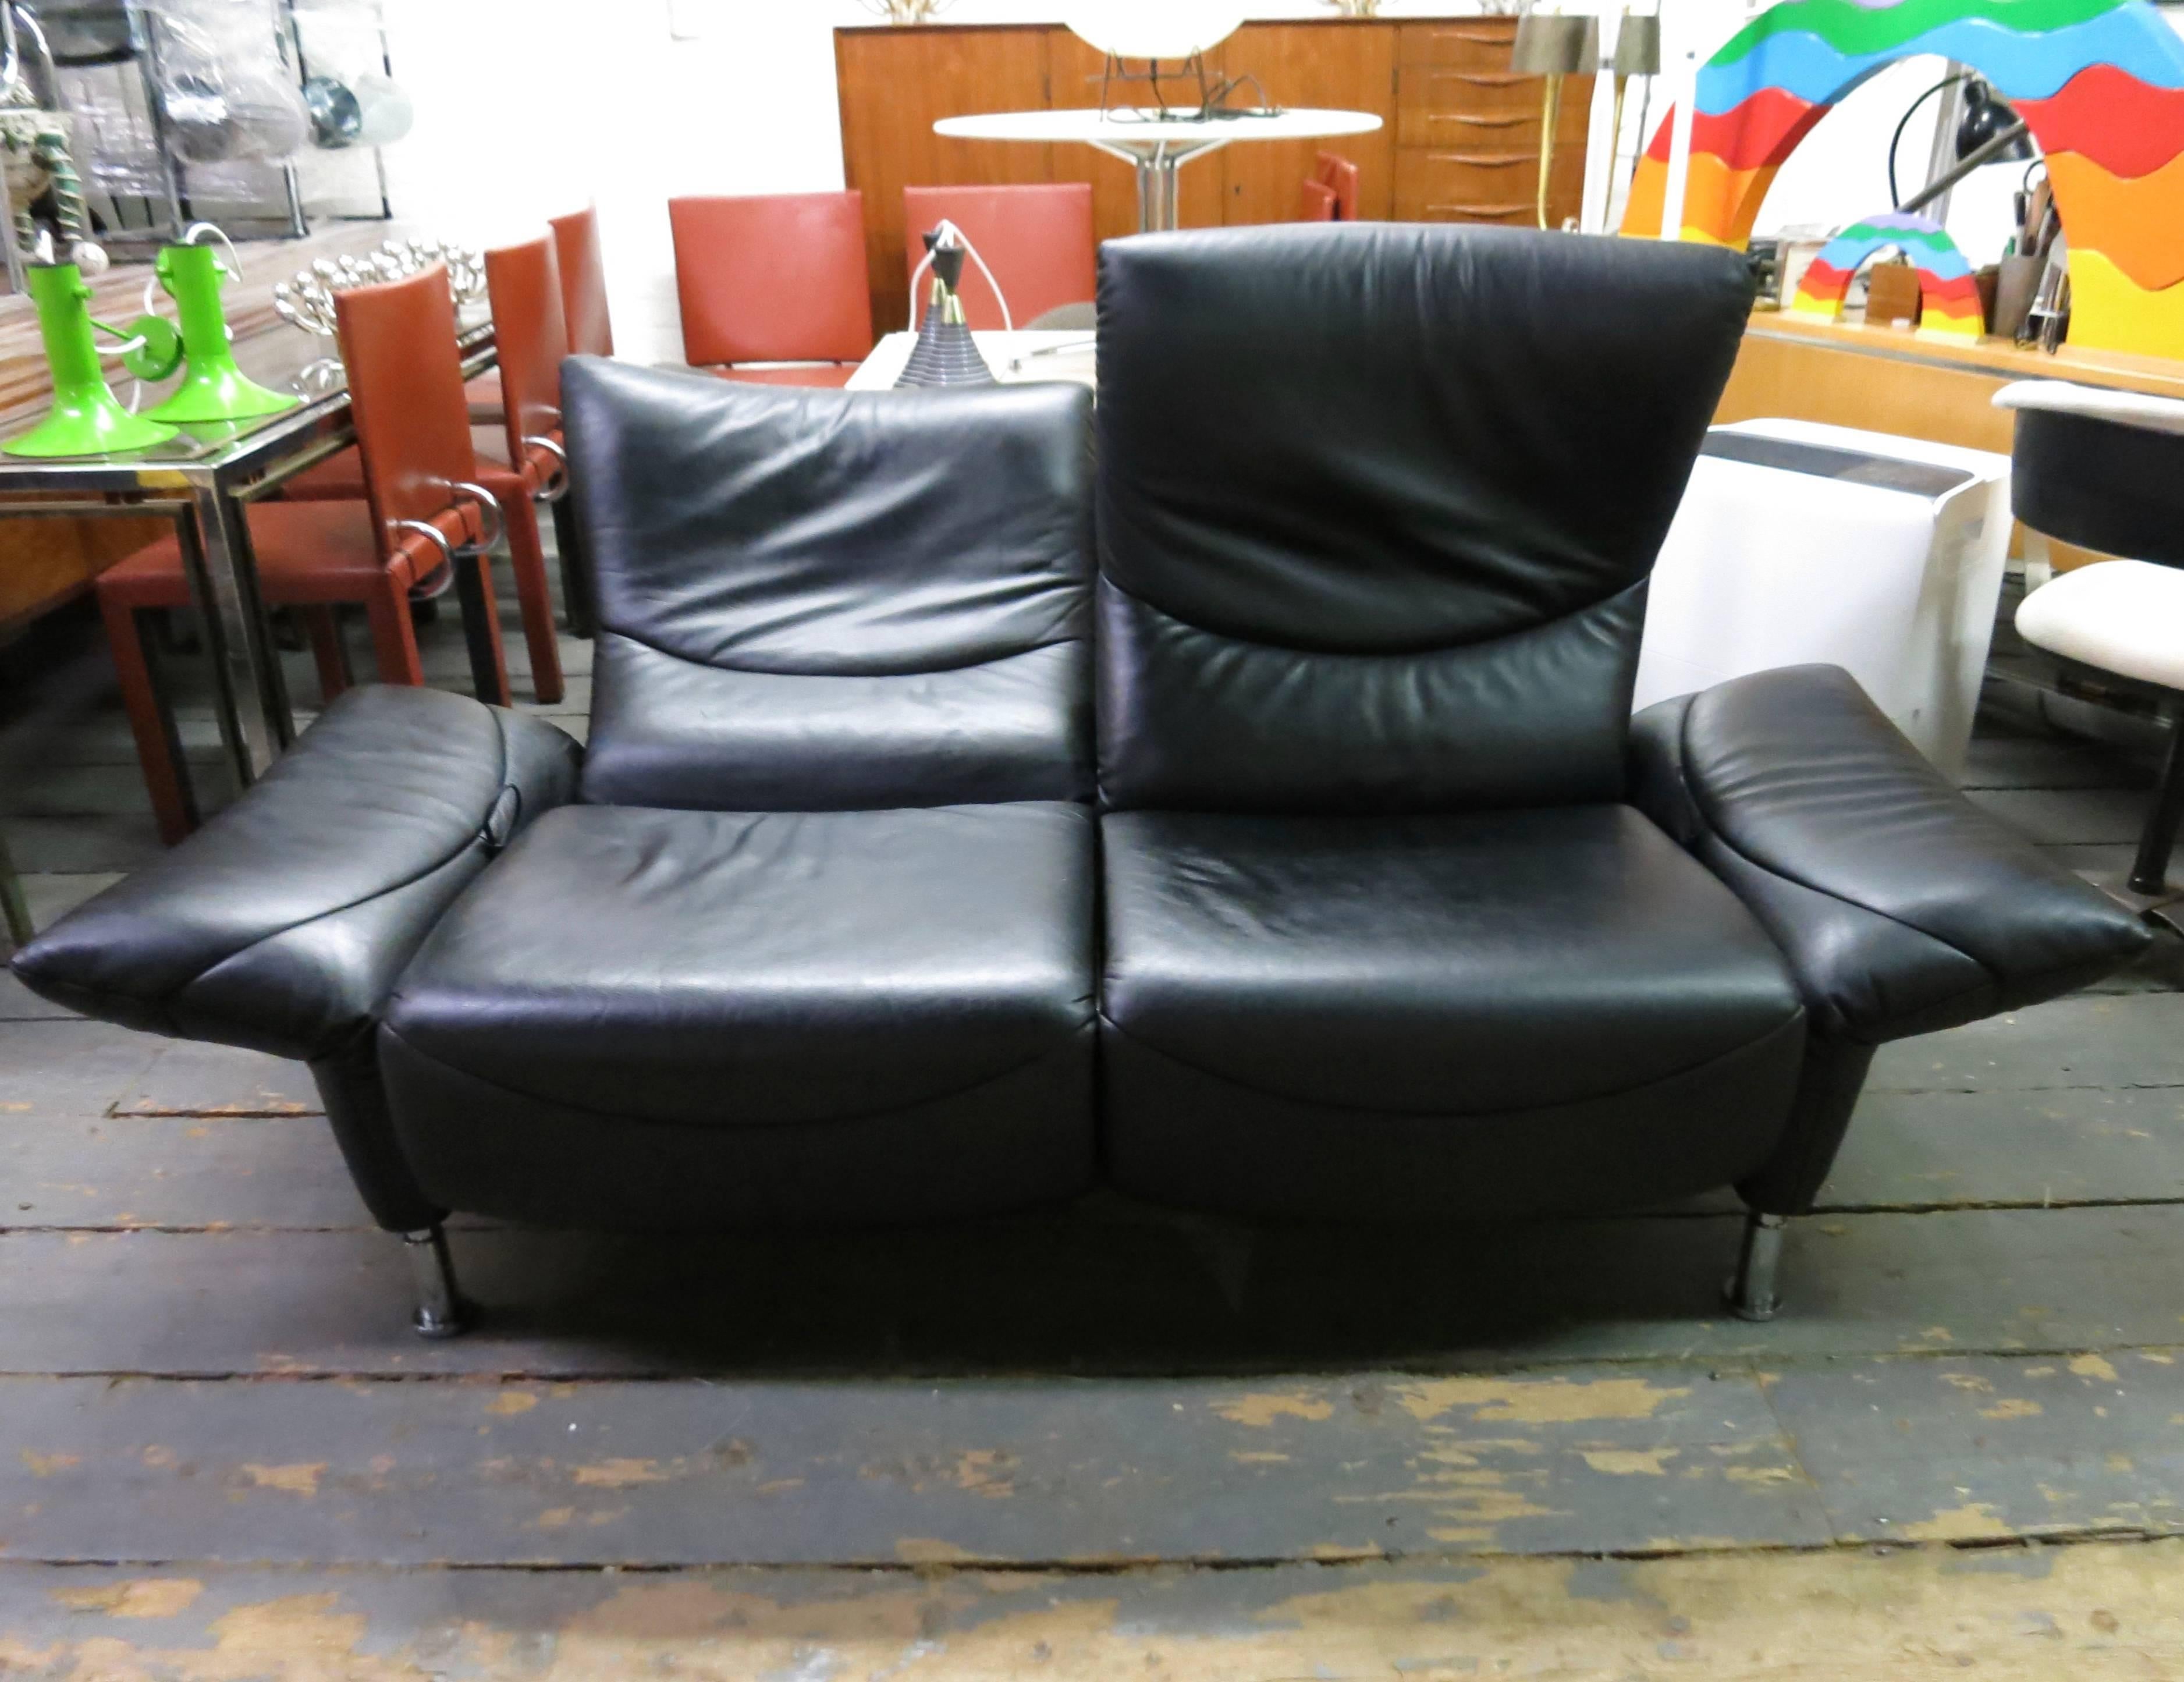 Modern  Love Seat with  De Sede, stamped in the leather 1990s Made in Switzerland